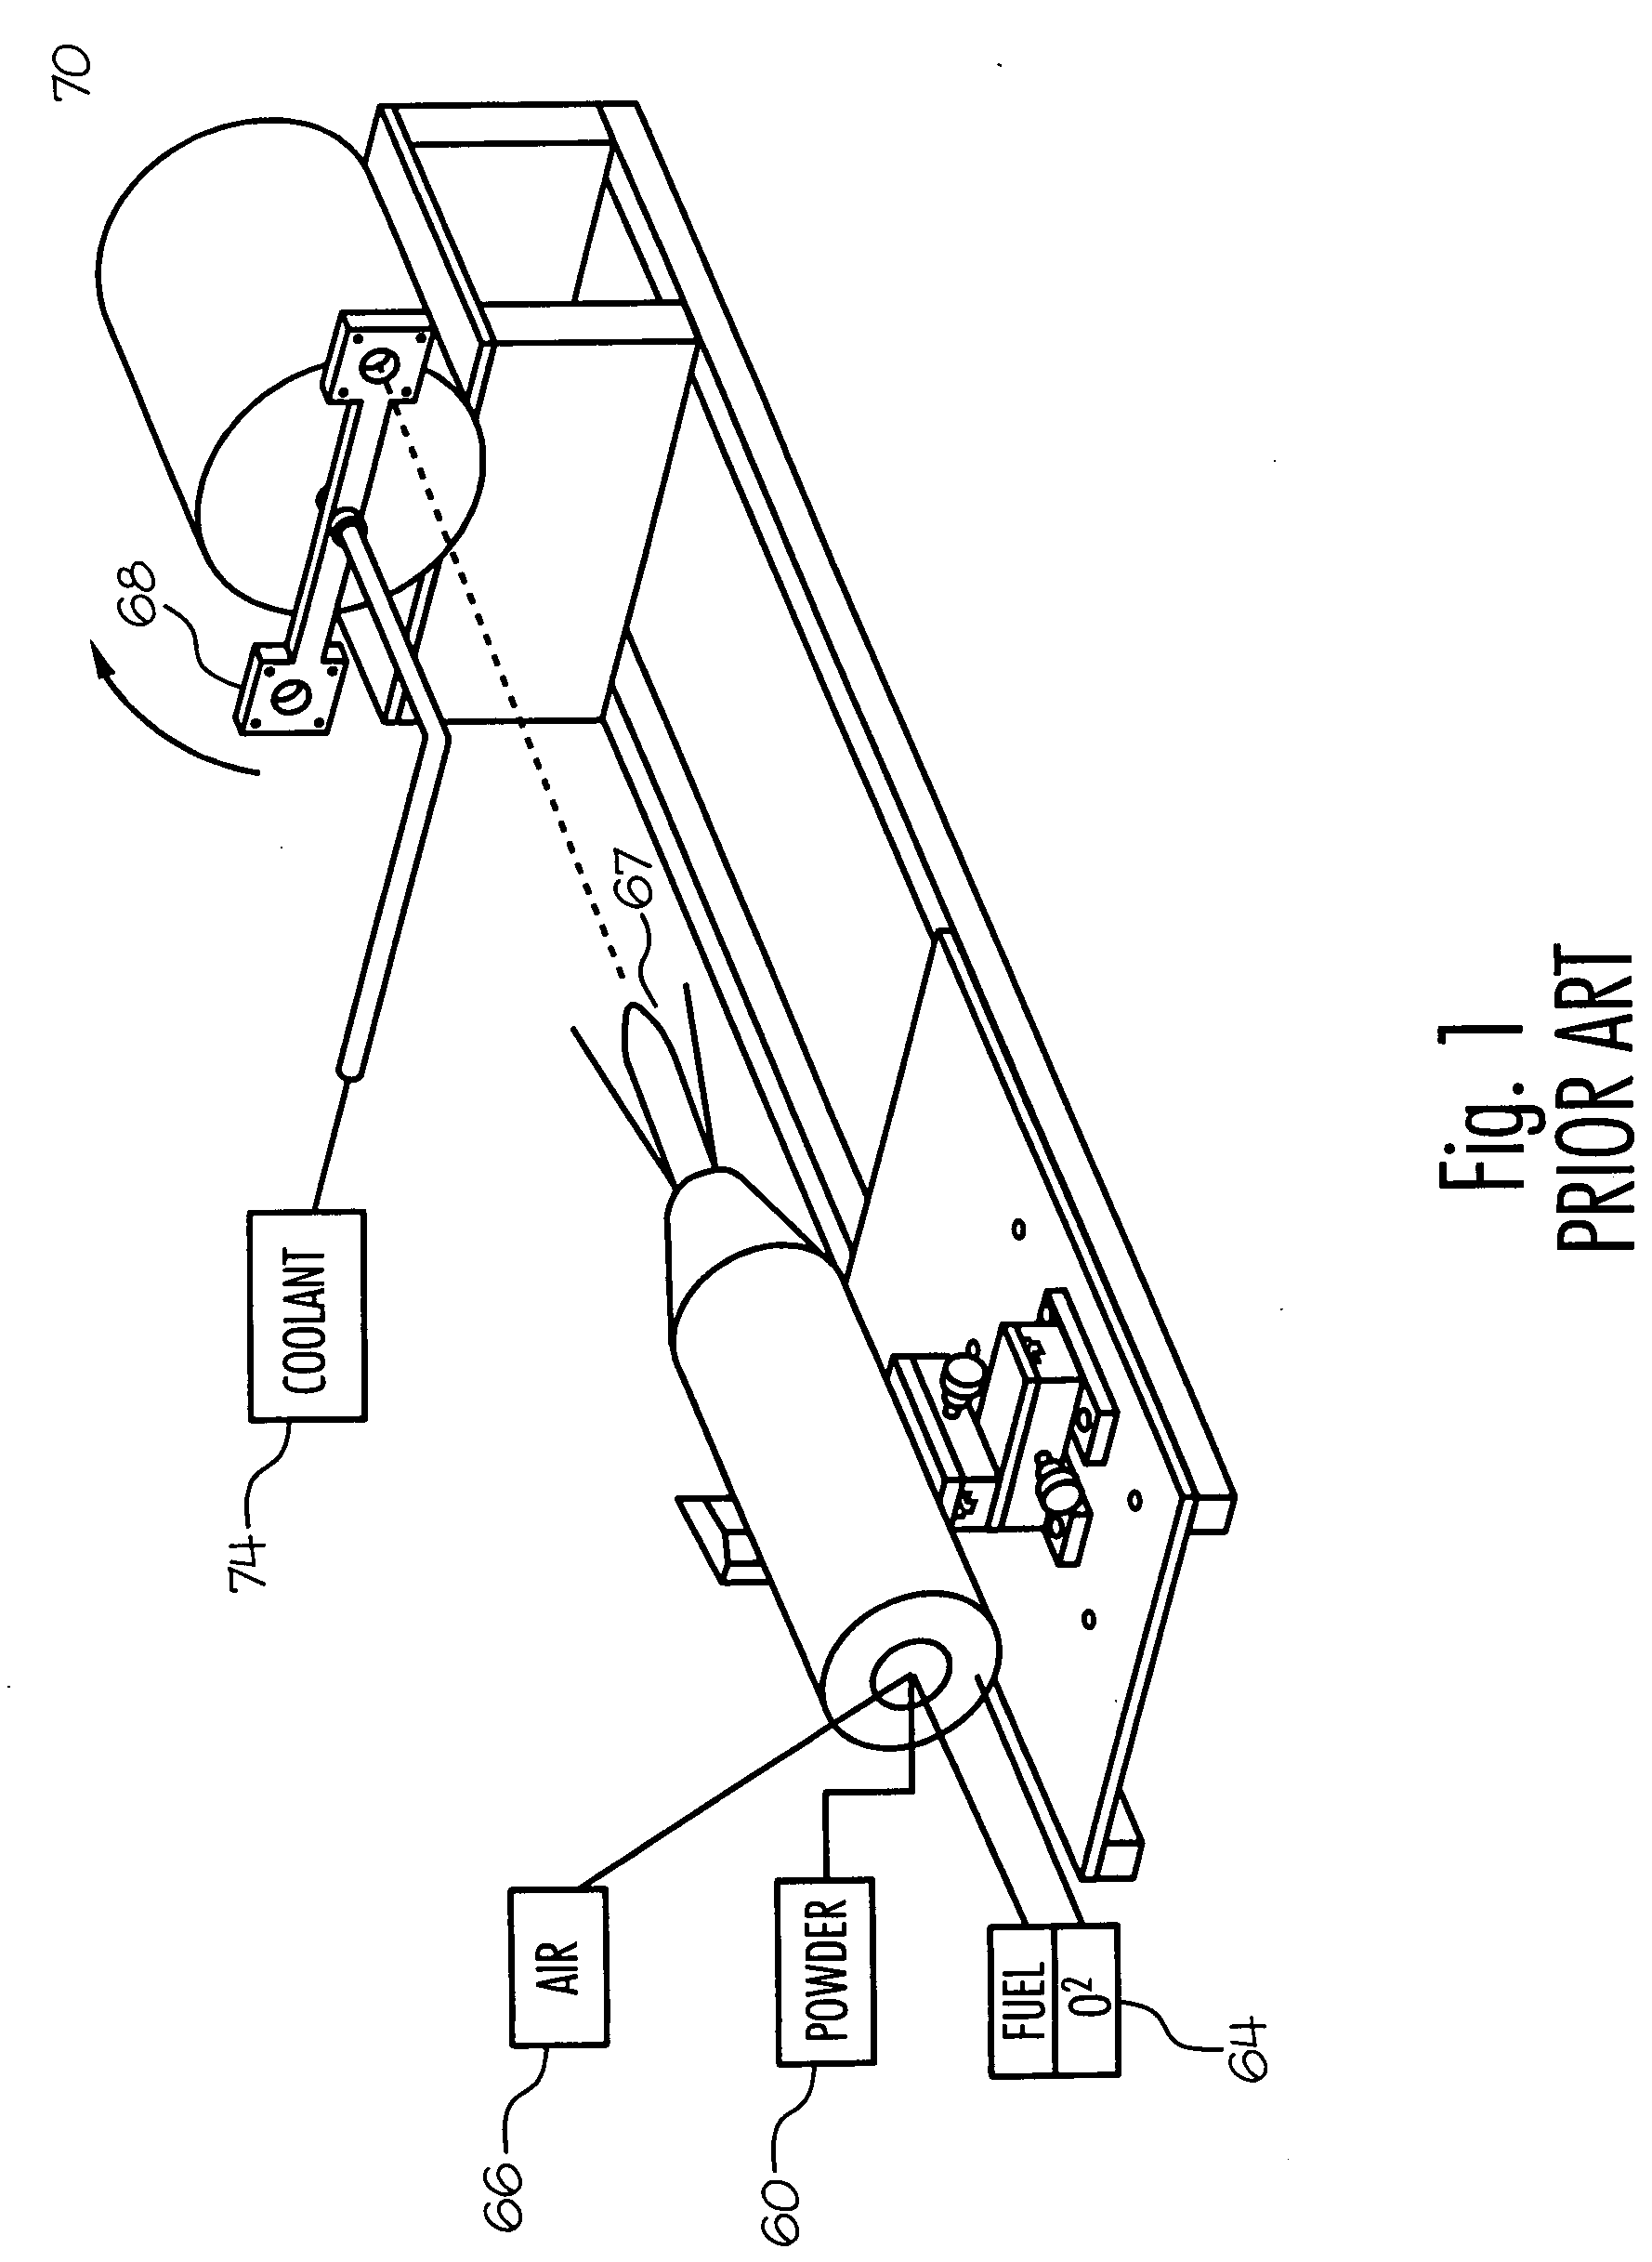 Spray coating apparatus and fixtures